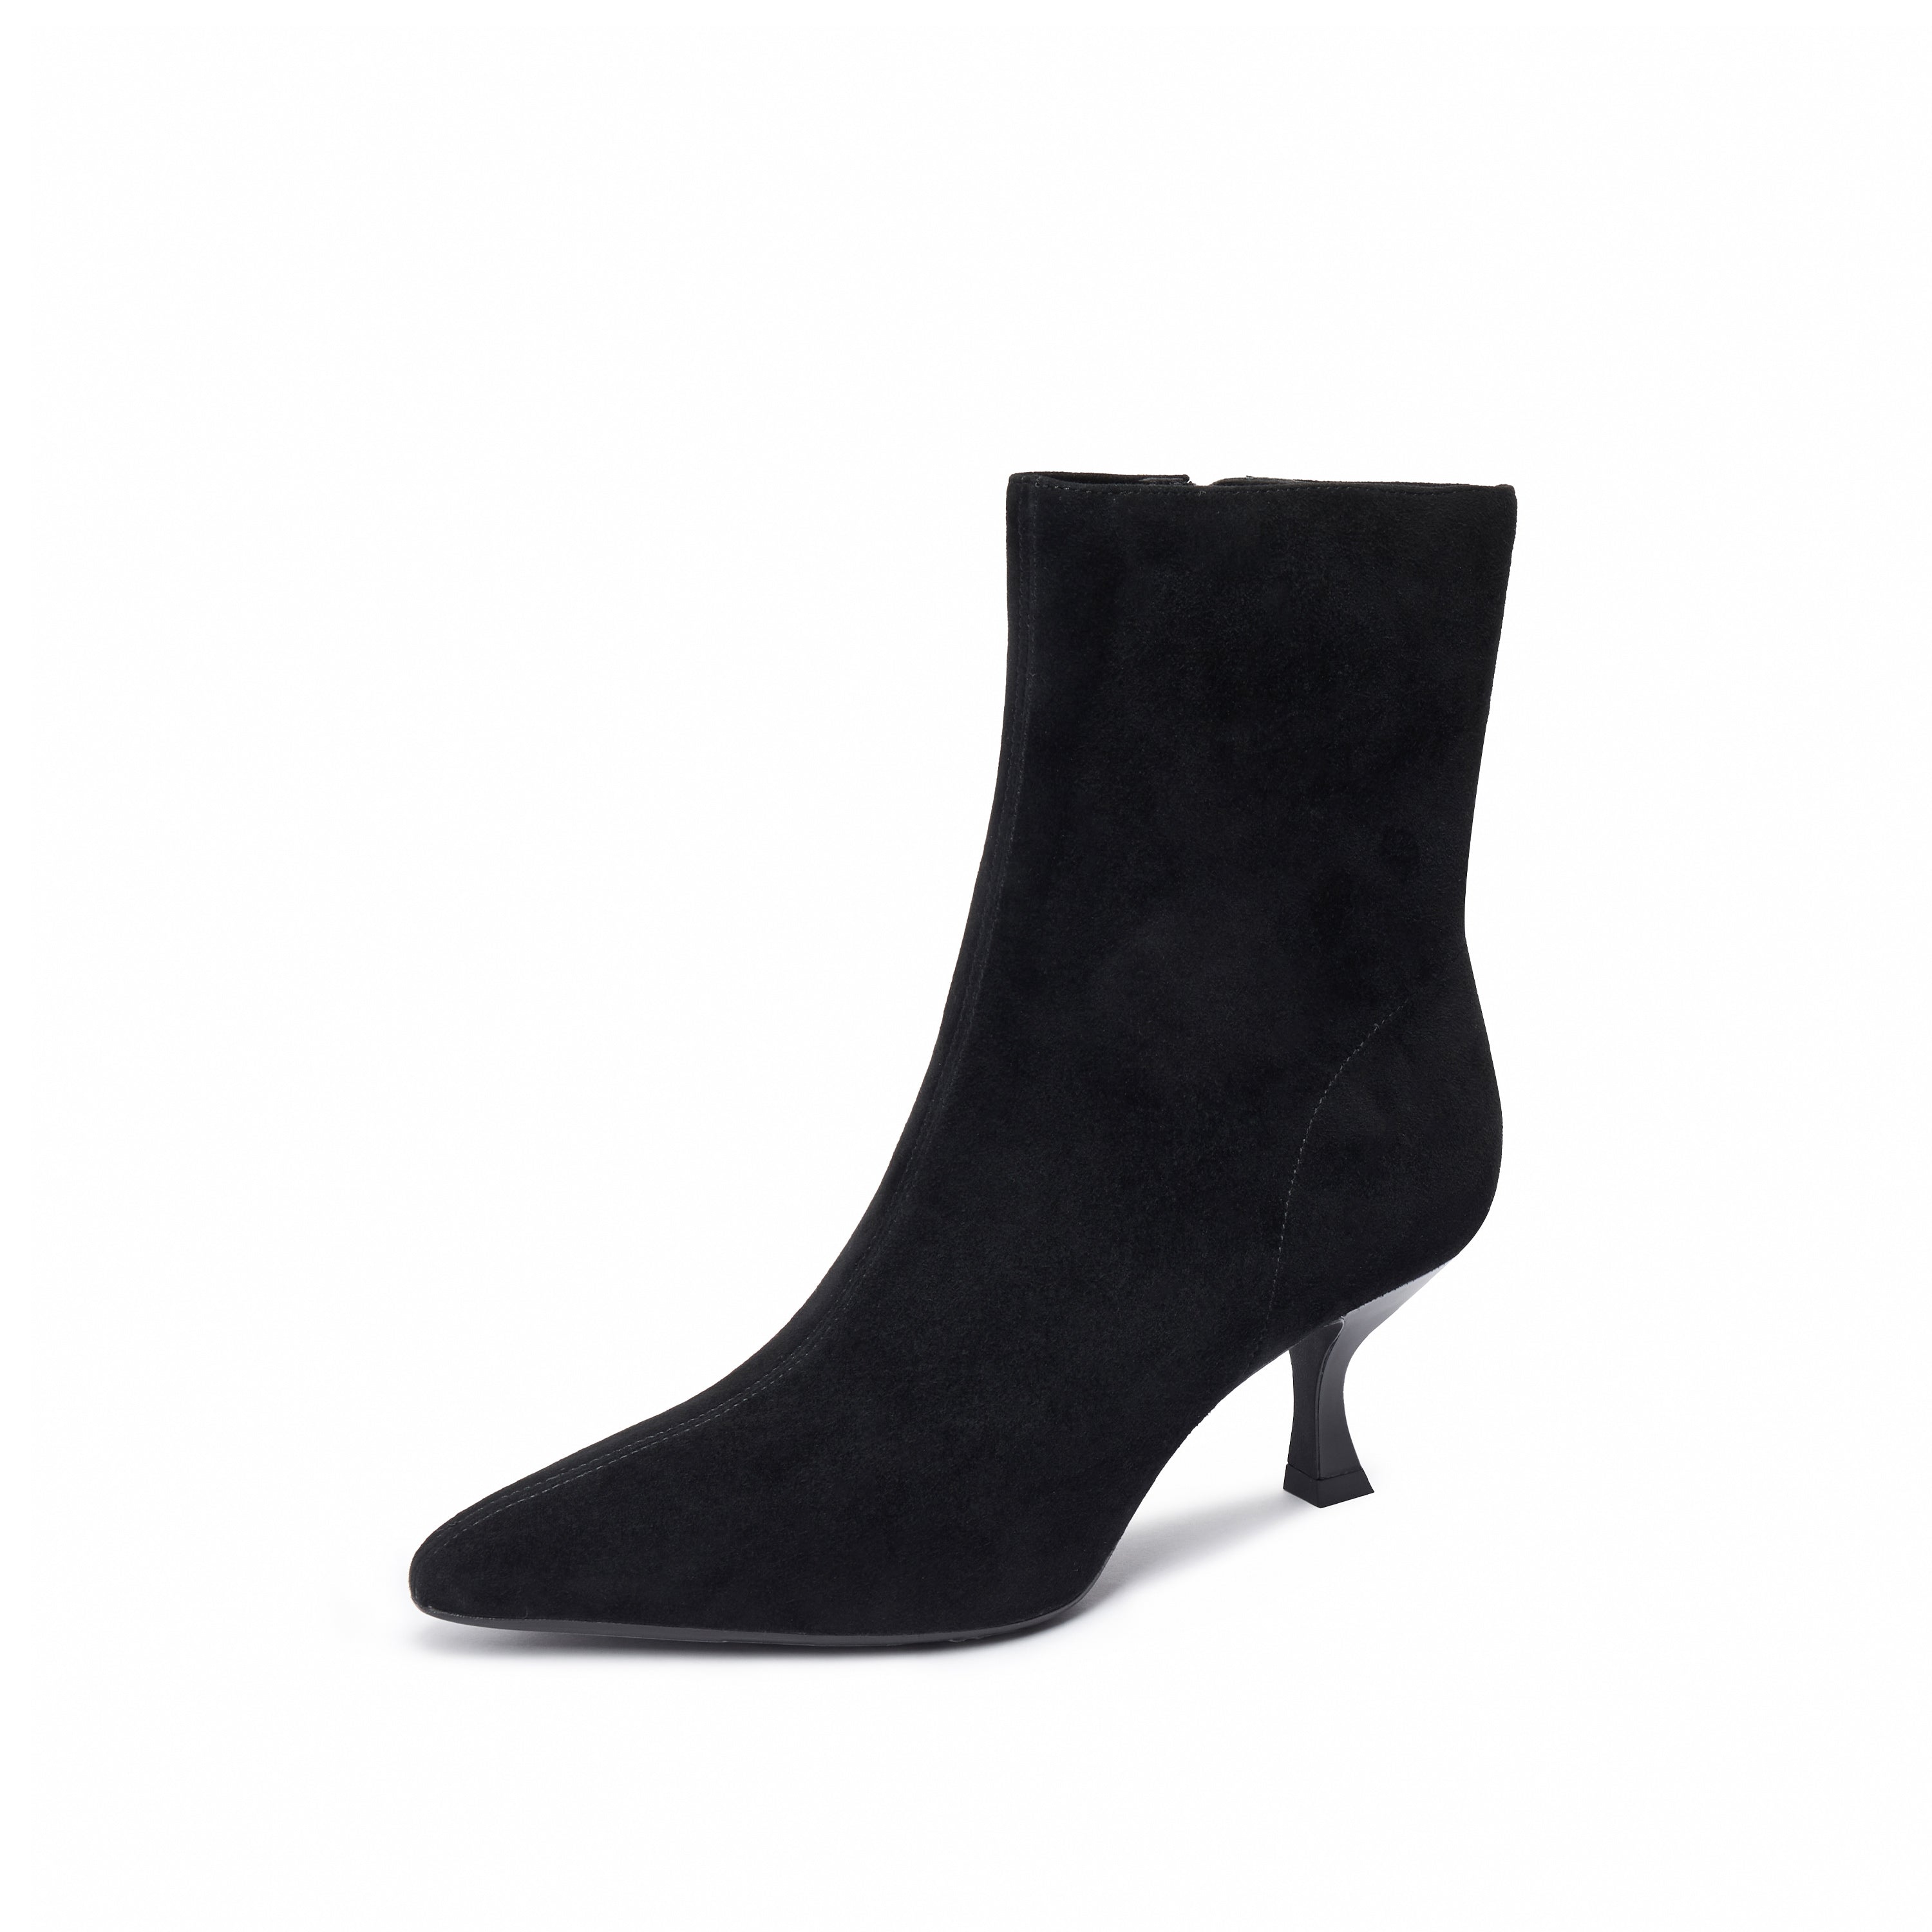 Black Suede Pointy Heeled Ankle Boots